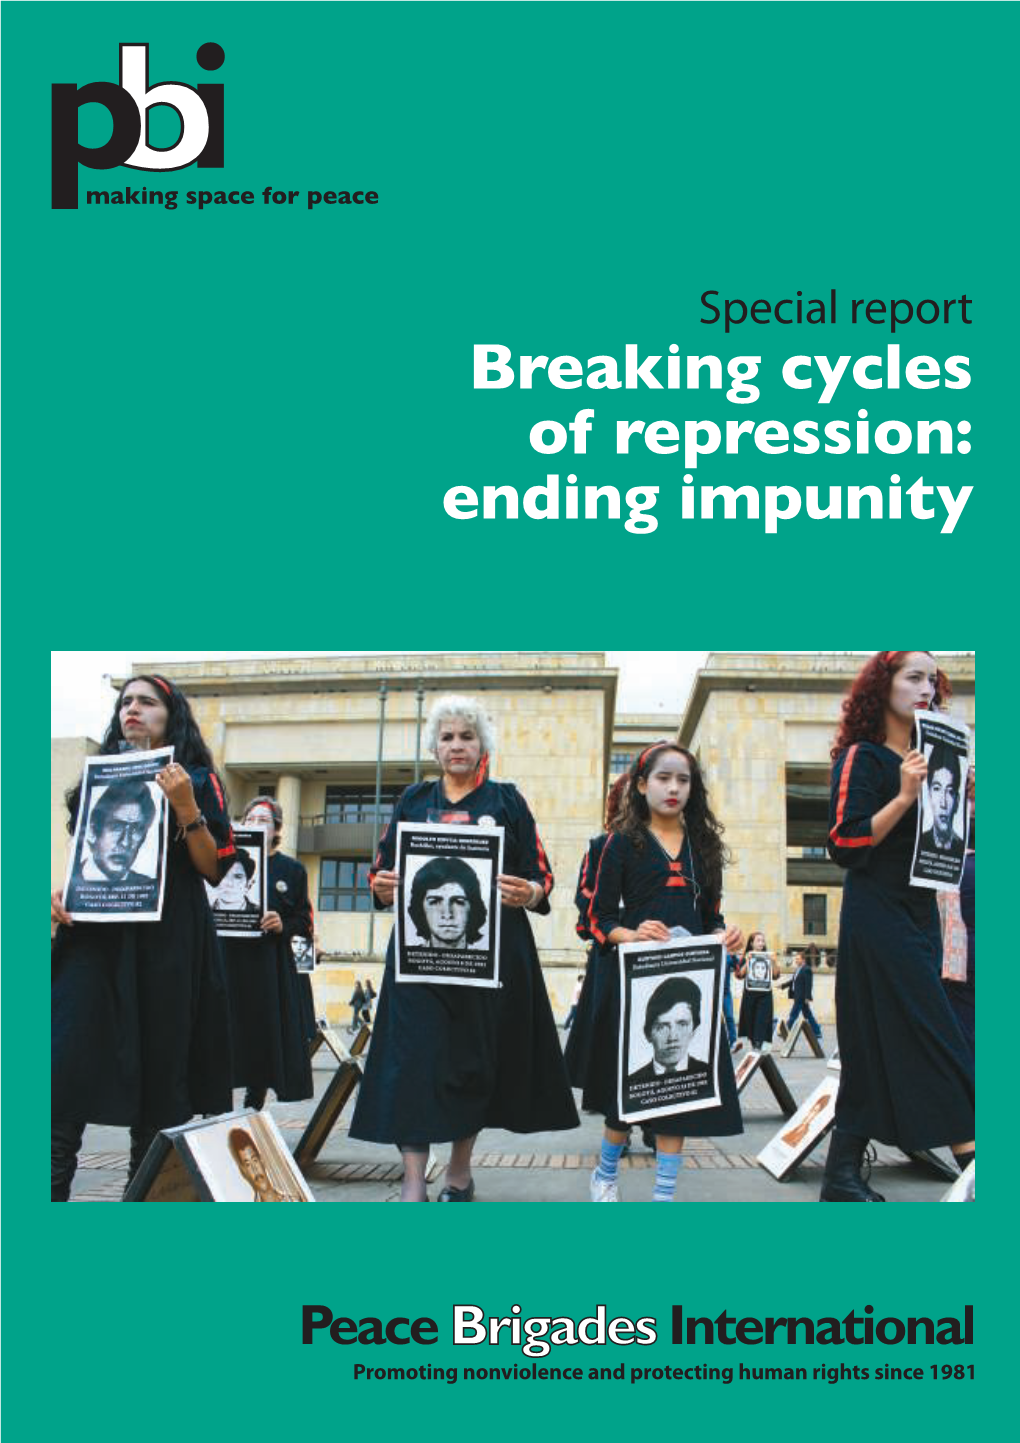 Special Report on Impunity